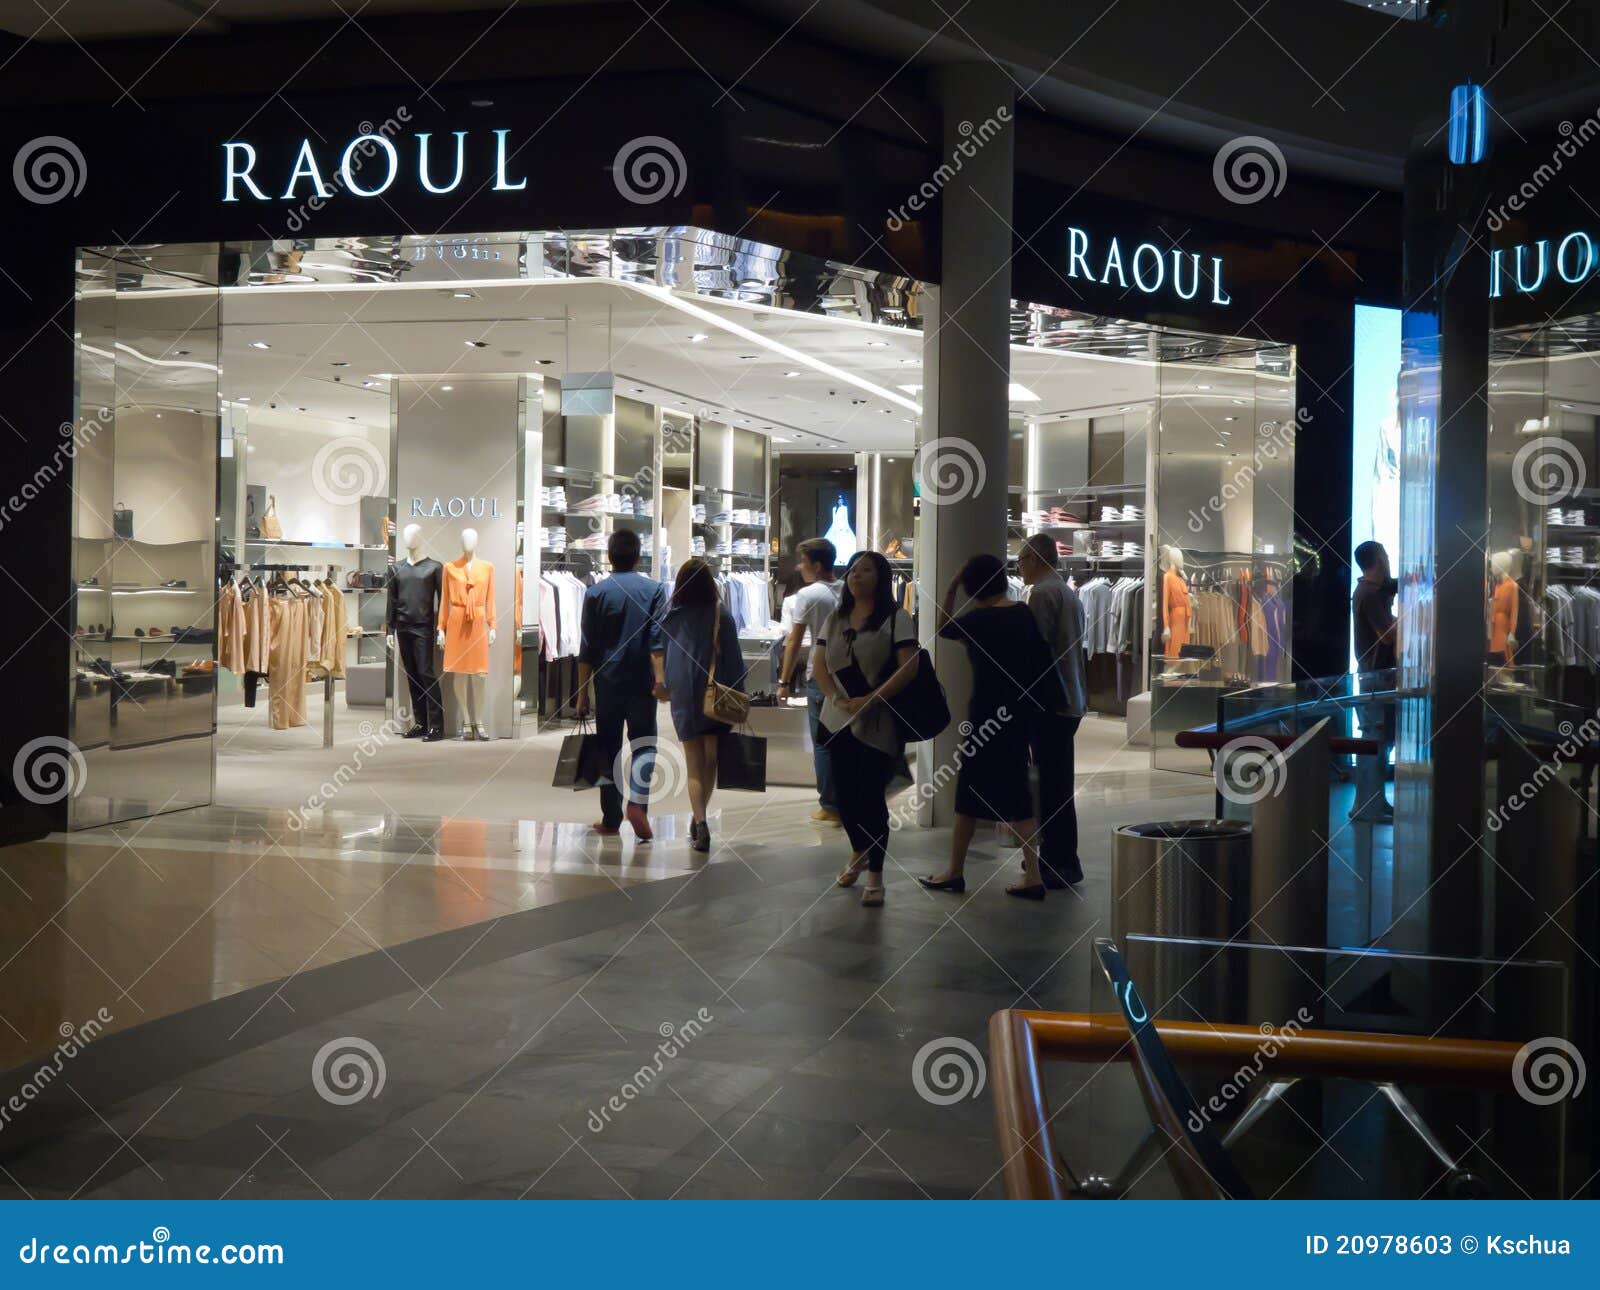 Raoul Retail Store Editorial Stock Photo - Image: 20978603